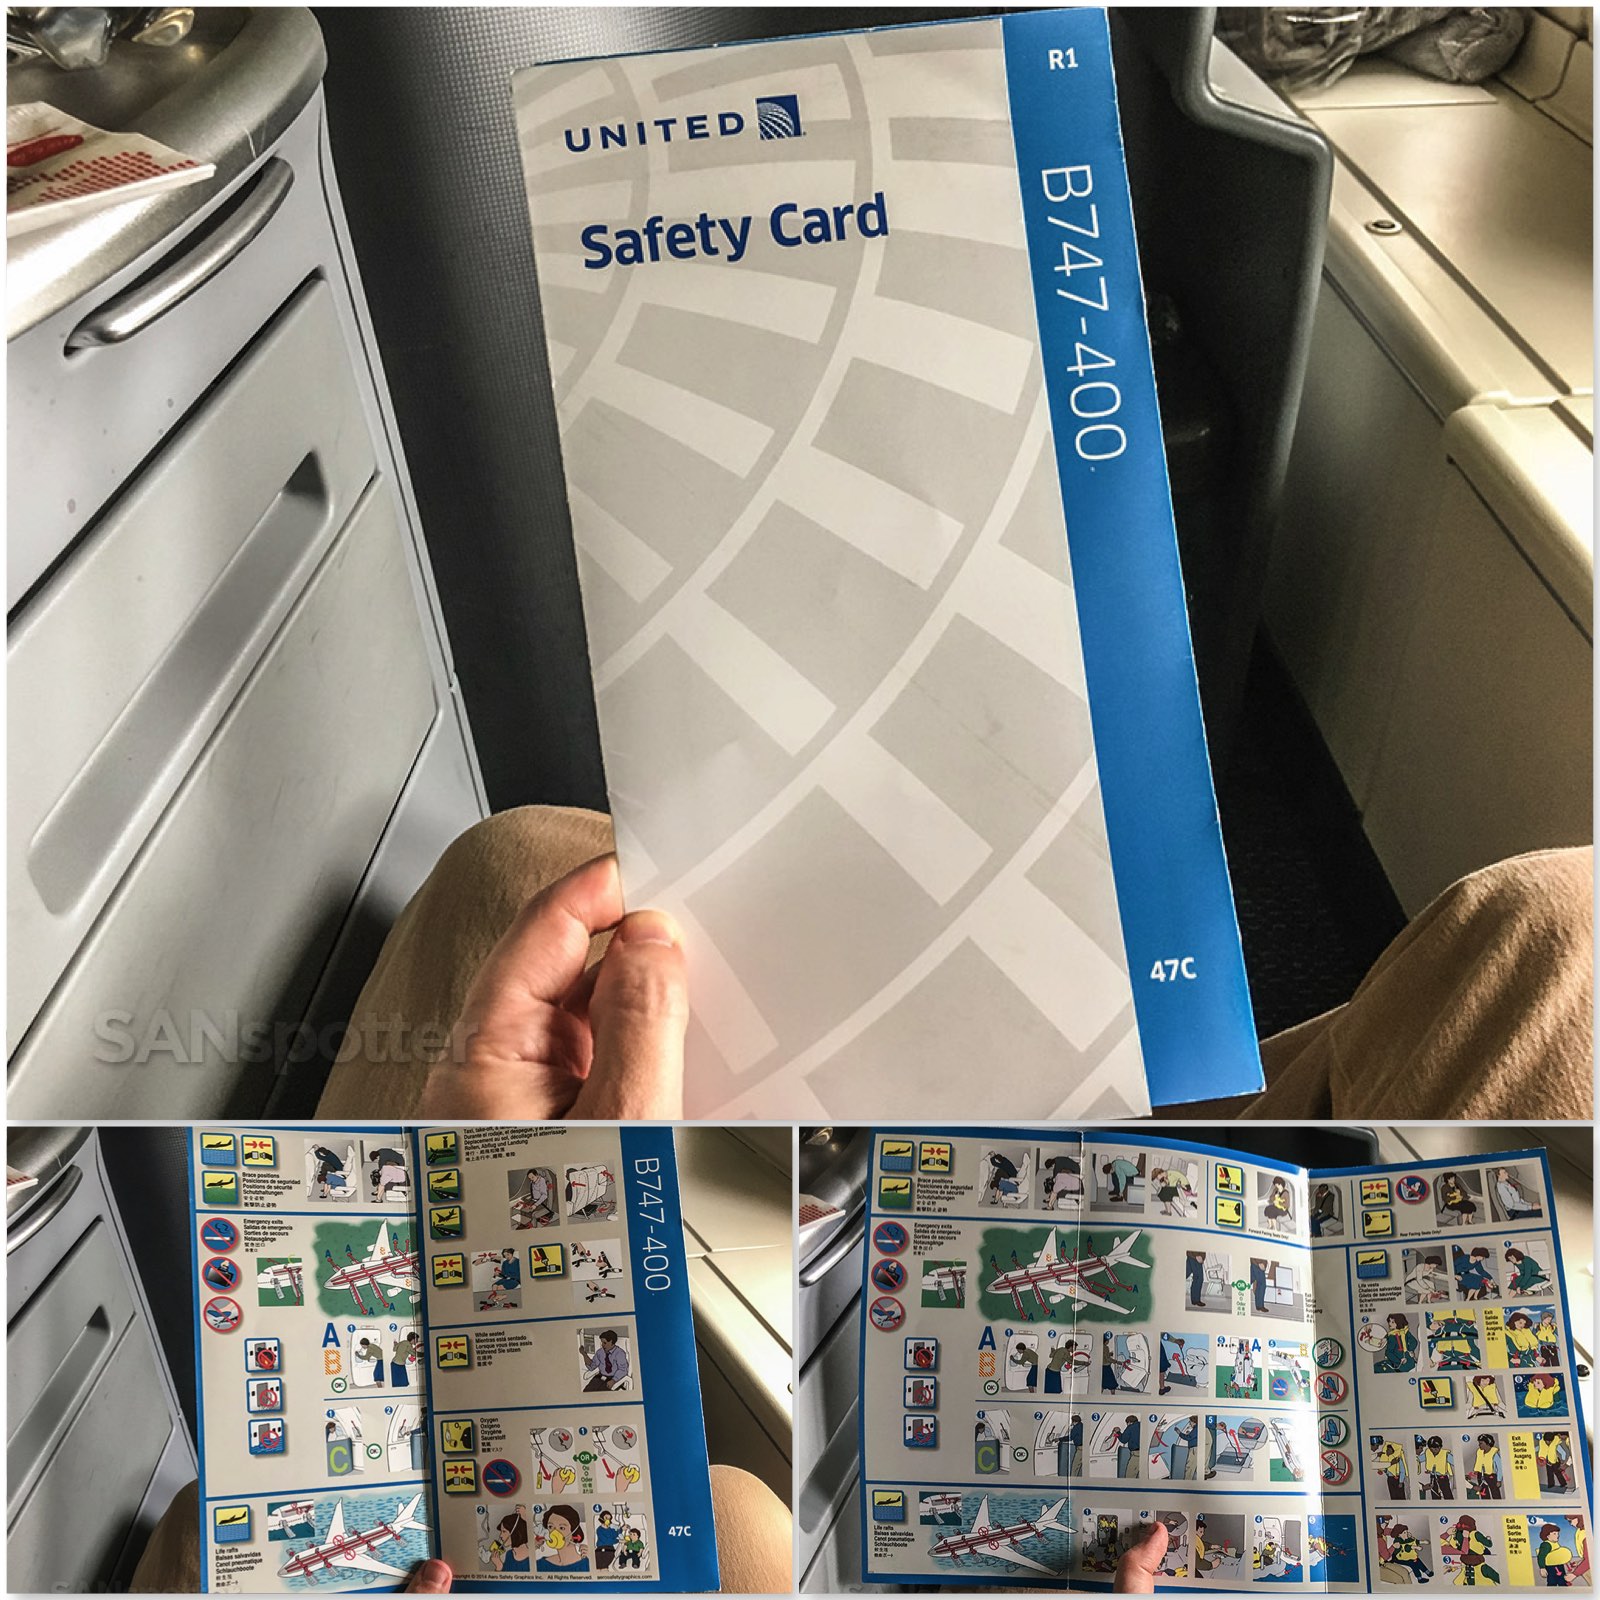 United airlines 747–400 safety card